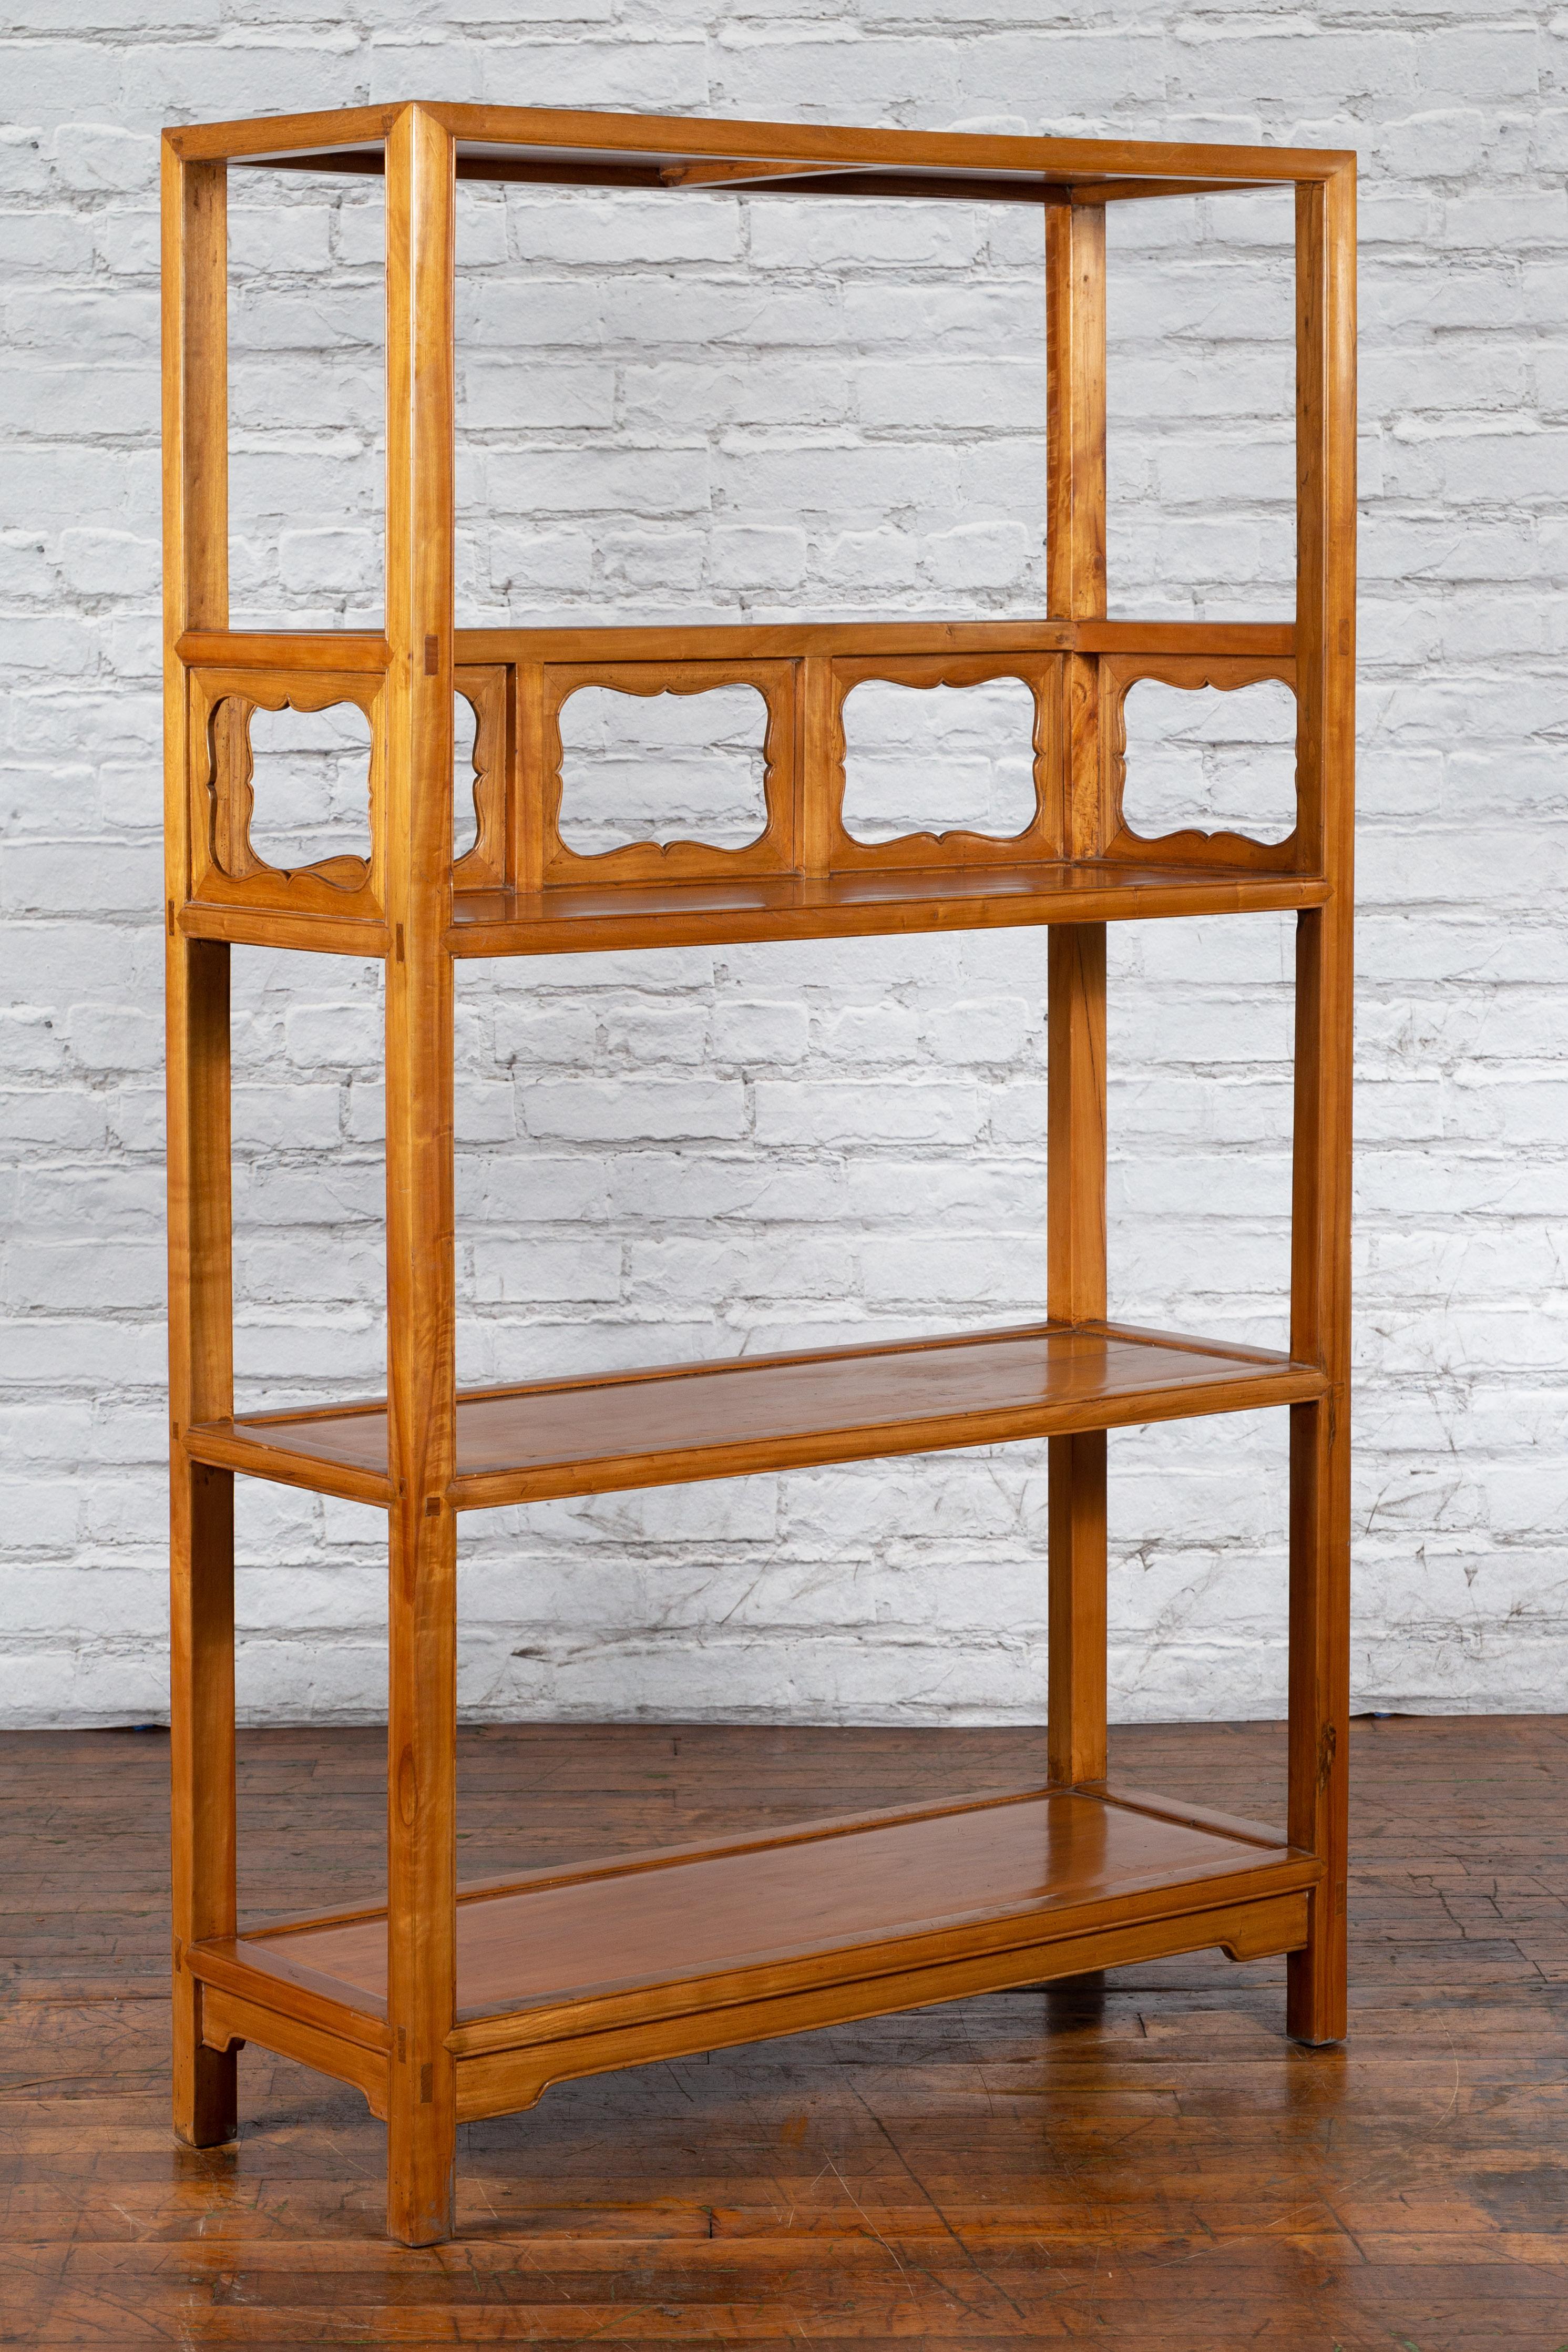 An antique Chinese Qing Dynasty elmwood bookcase from the 19th century, with three shelves and decorative carved panels. Created in China during the Qing Dynasty, this elmwood bookcase features an open structure made of three shelves adorned with